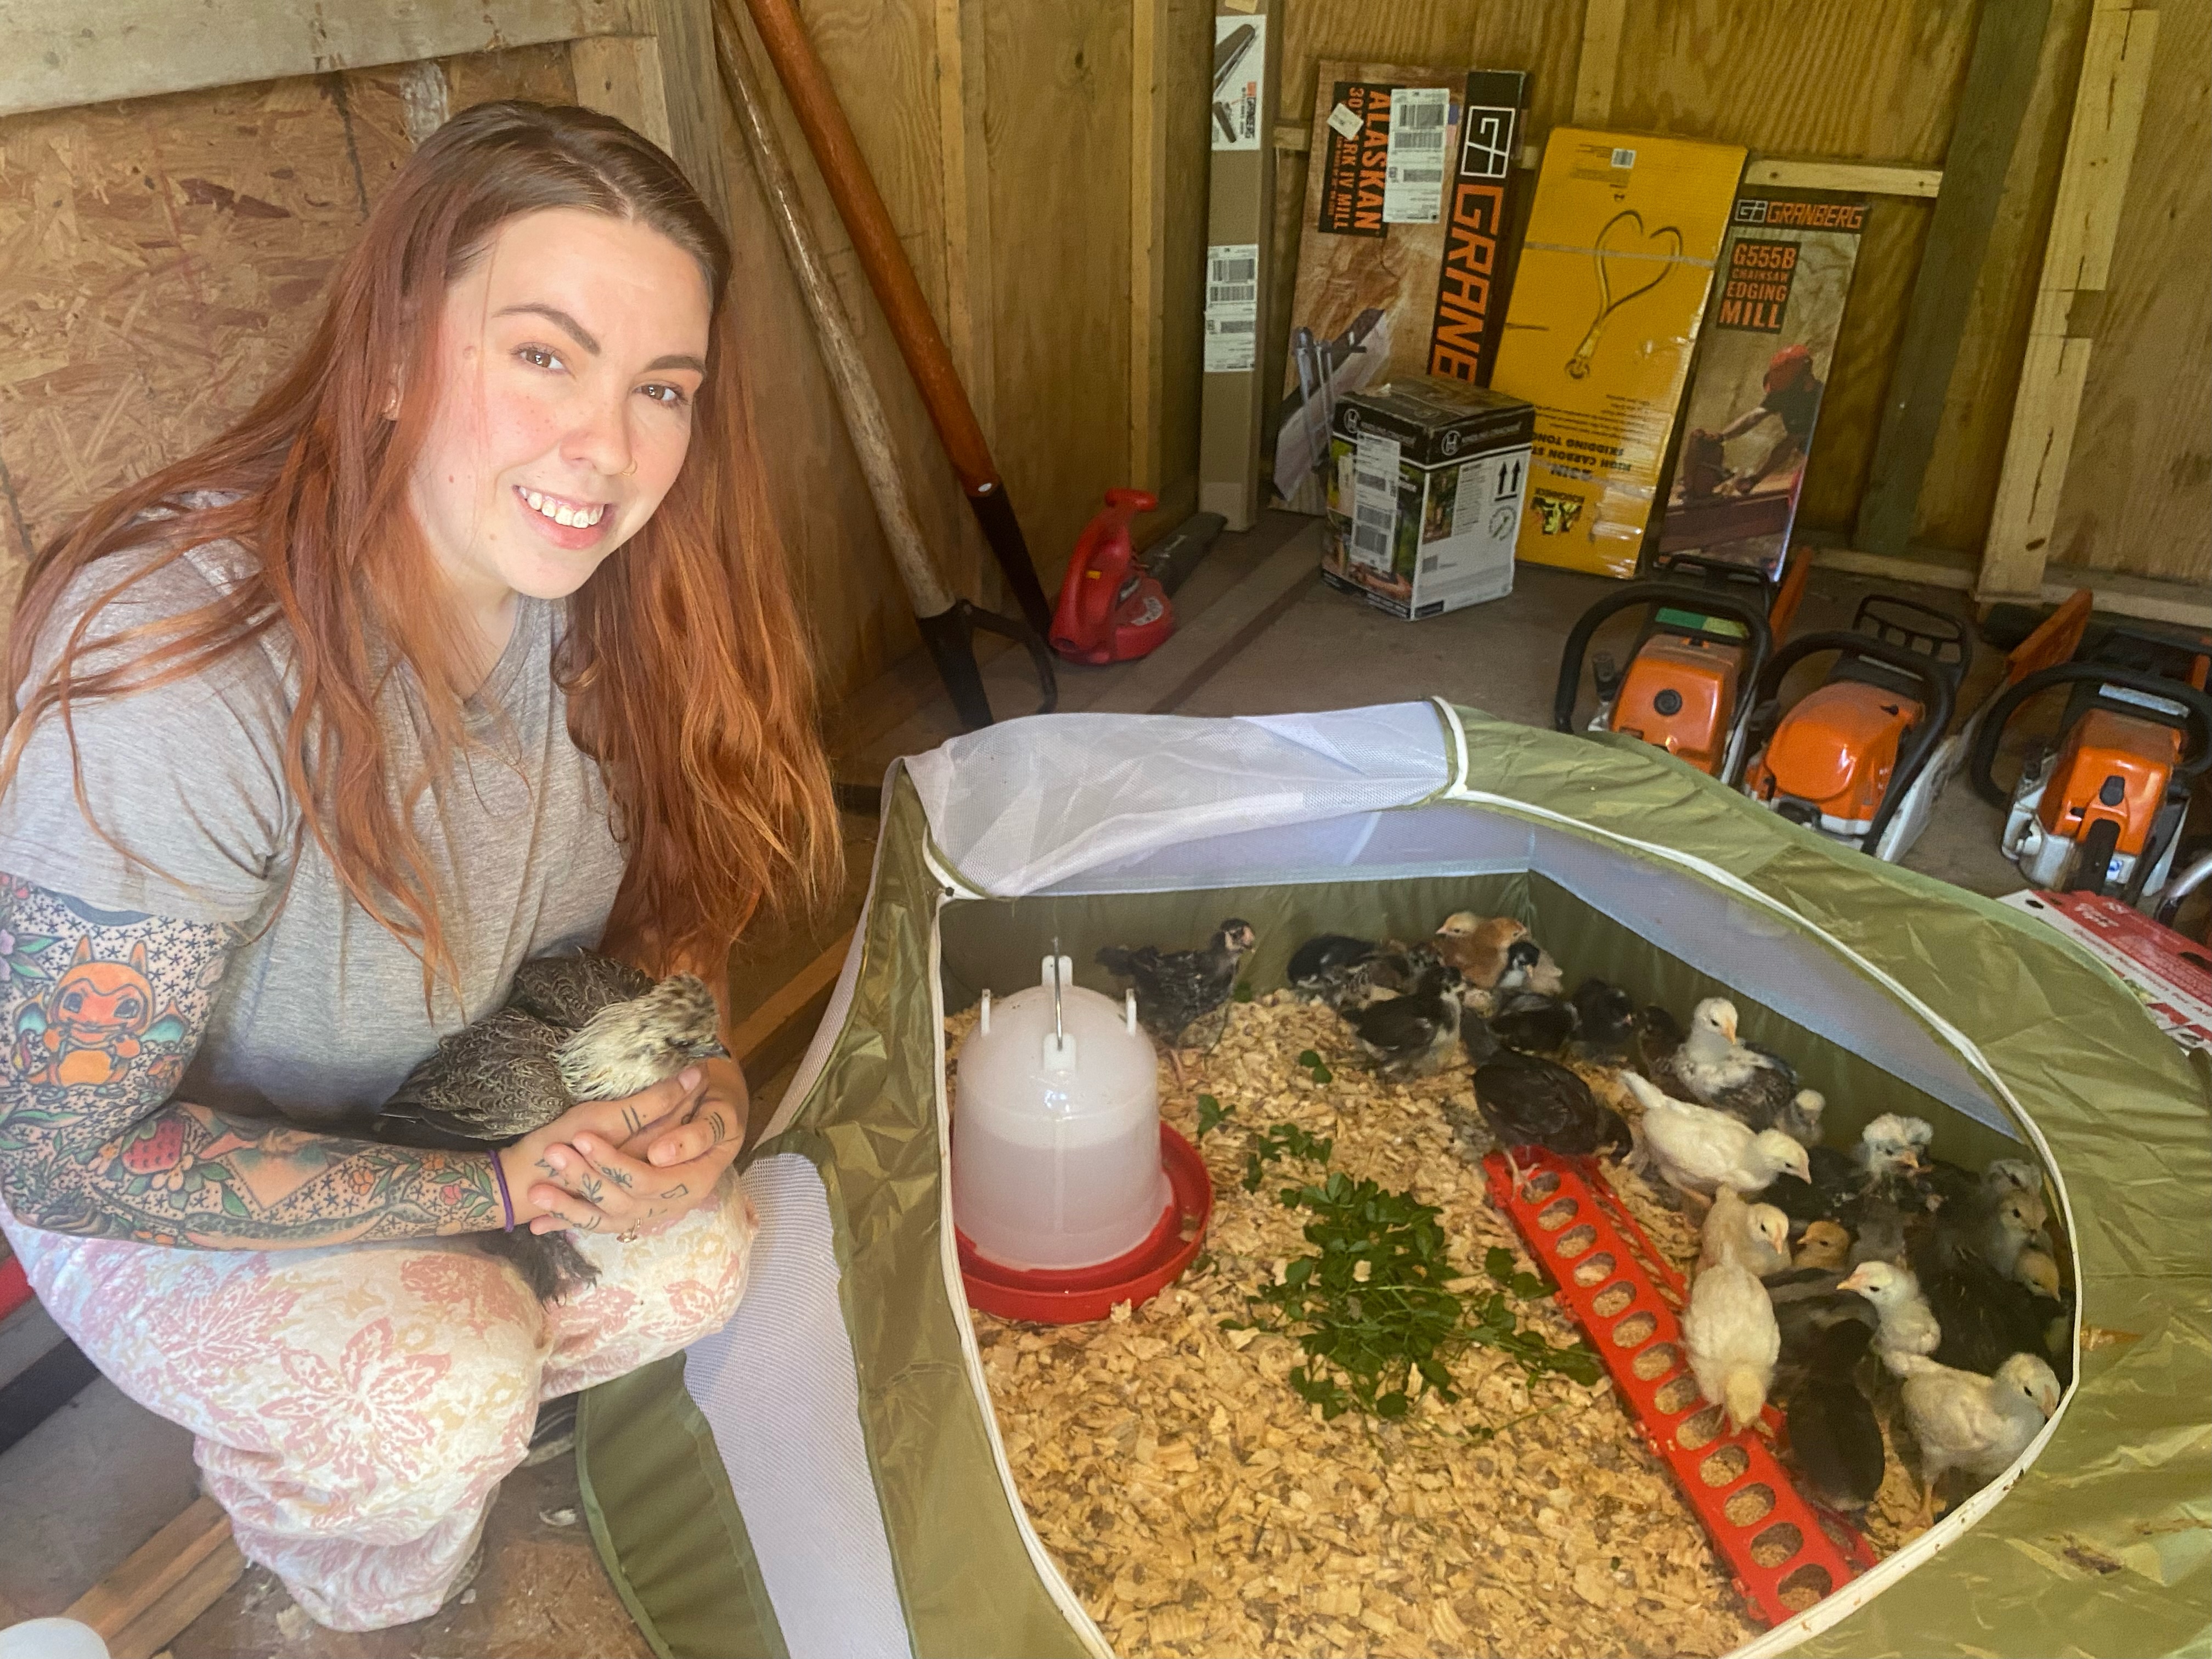 Sarah Rutherford, who said her previous flock of more than 30 chickens was nearly wiped out by a neighborhood dog, has a new flock with 42 birds, thanks to donations from folks throughout Oglethorpe County. The Lexington resident holds the only chicken to survive the recent attacks. (Dink NeSmith/The Oglethorpe Echo)